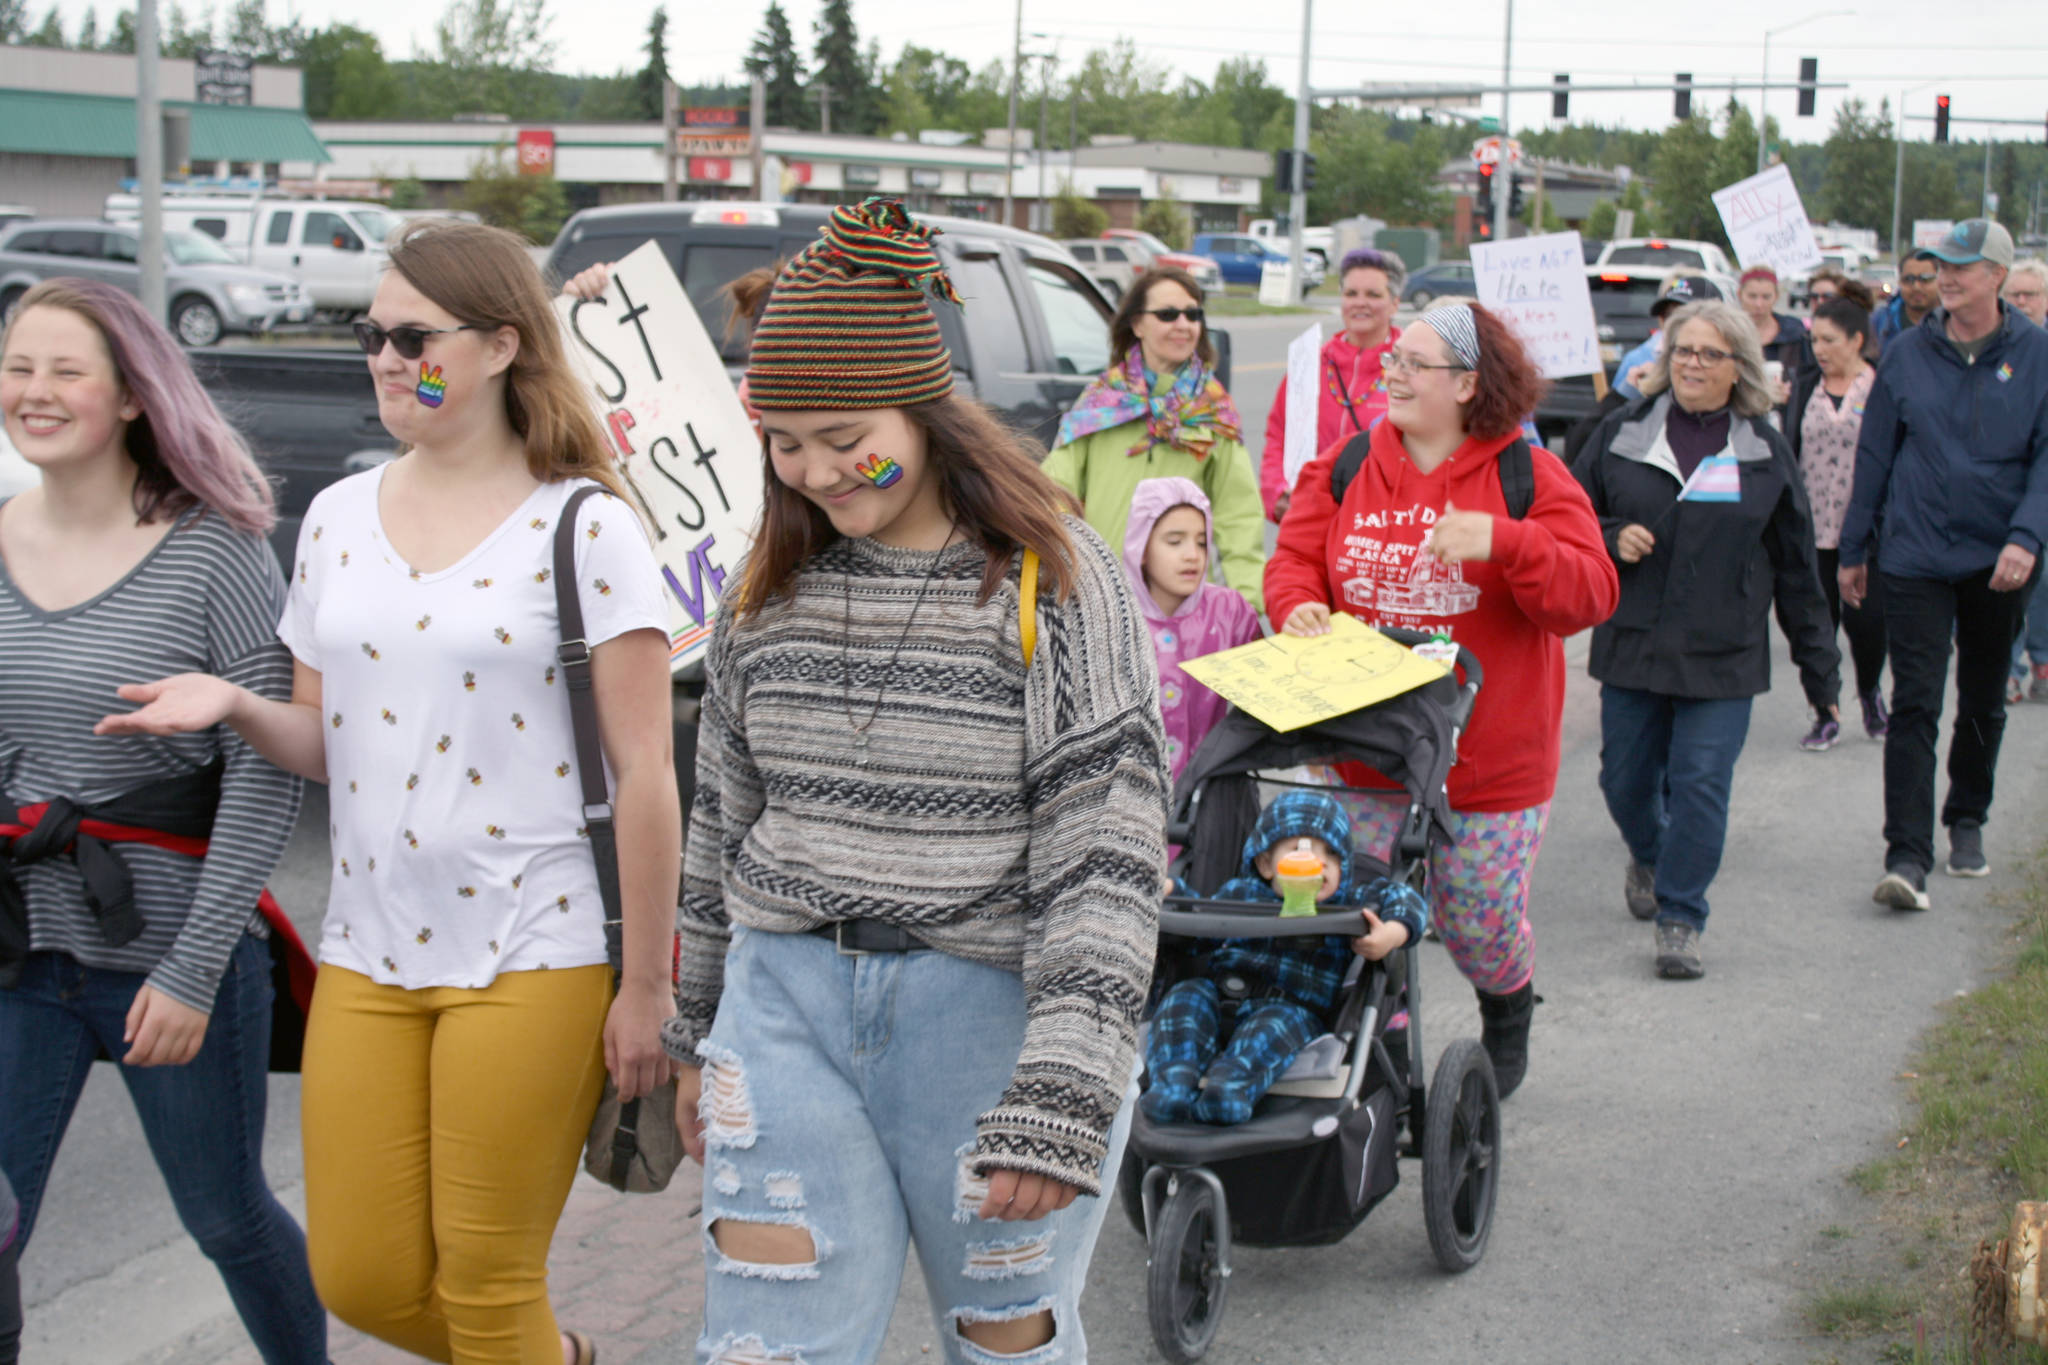 Participants in the Two Spirit Pride March walk along the Sterling Highway on their way to Soldotna Creek Park Wednesday. About 60 people turned out to the march celebrating LGBTQ Pride. (Photo by Erin Thompson/Peninsula Clarion)